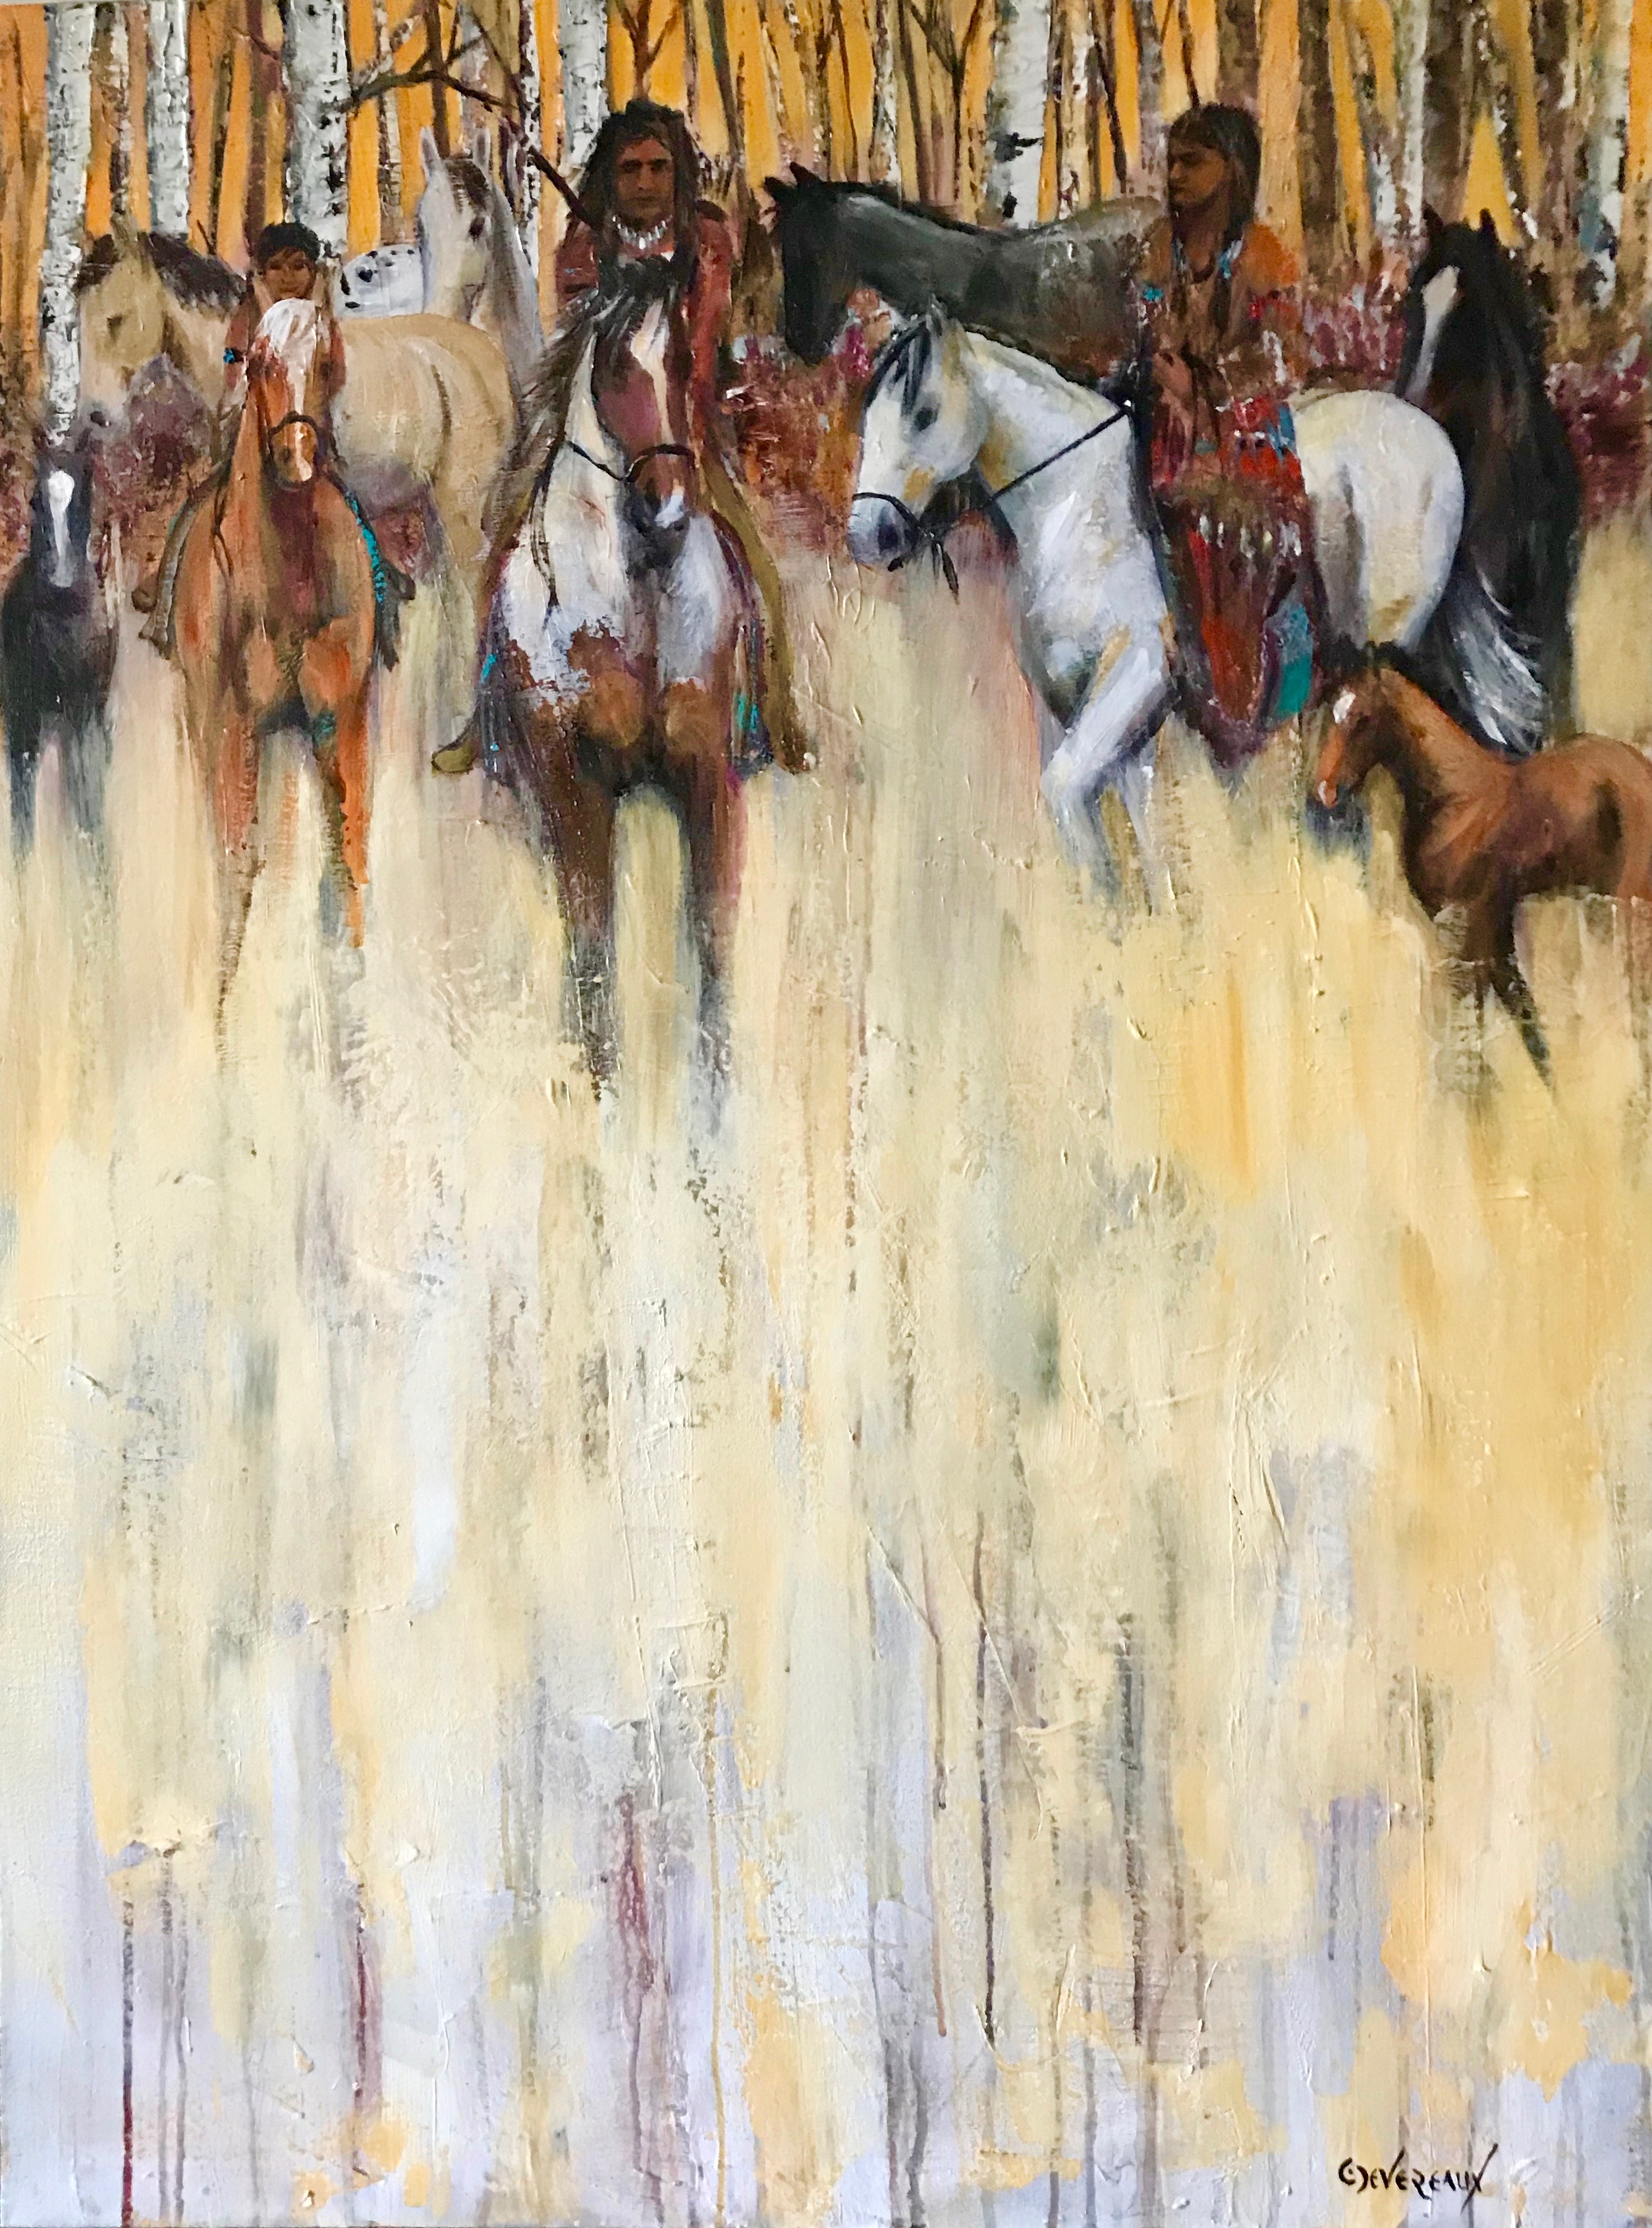 'Family Gathering' 30x40 in  contemporary modern native american, american indian painting by Cher Devereaux on stretched canvas.